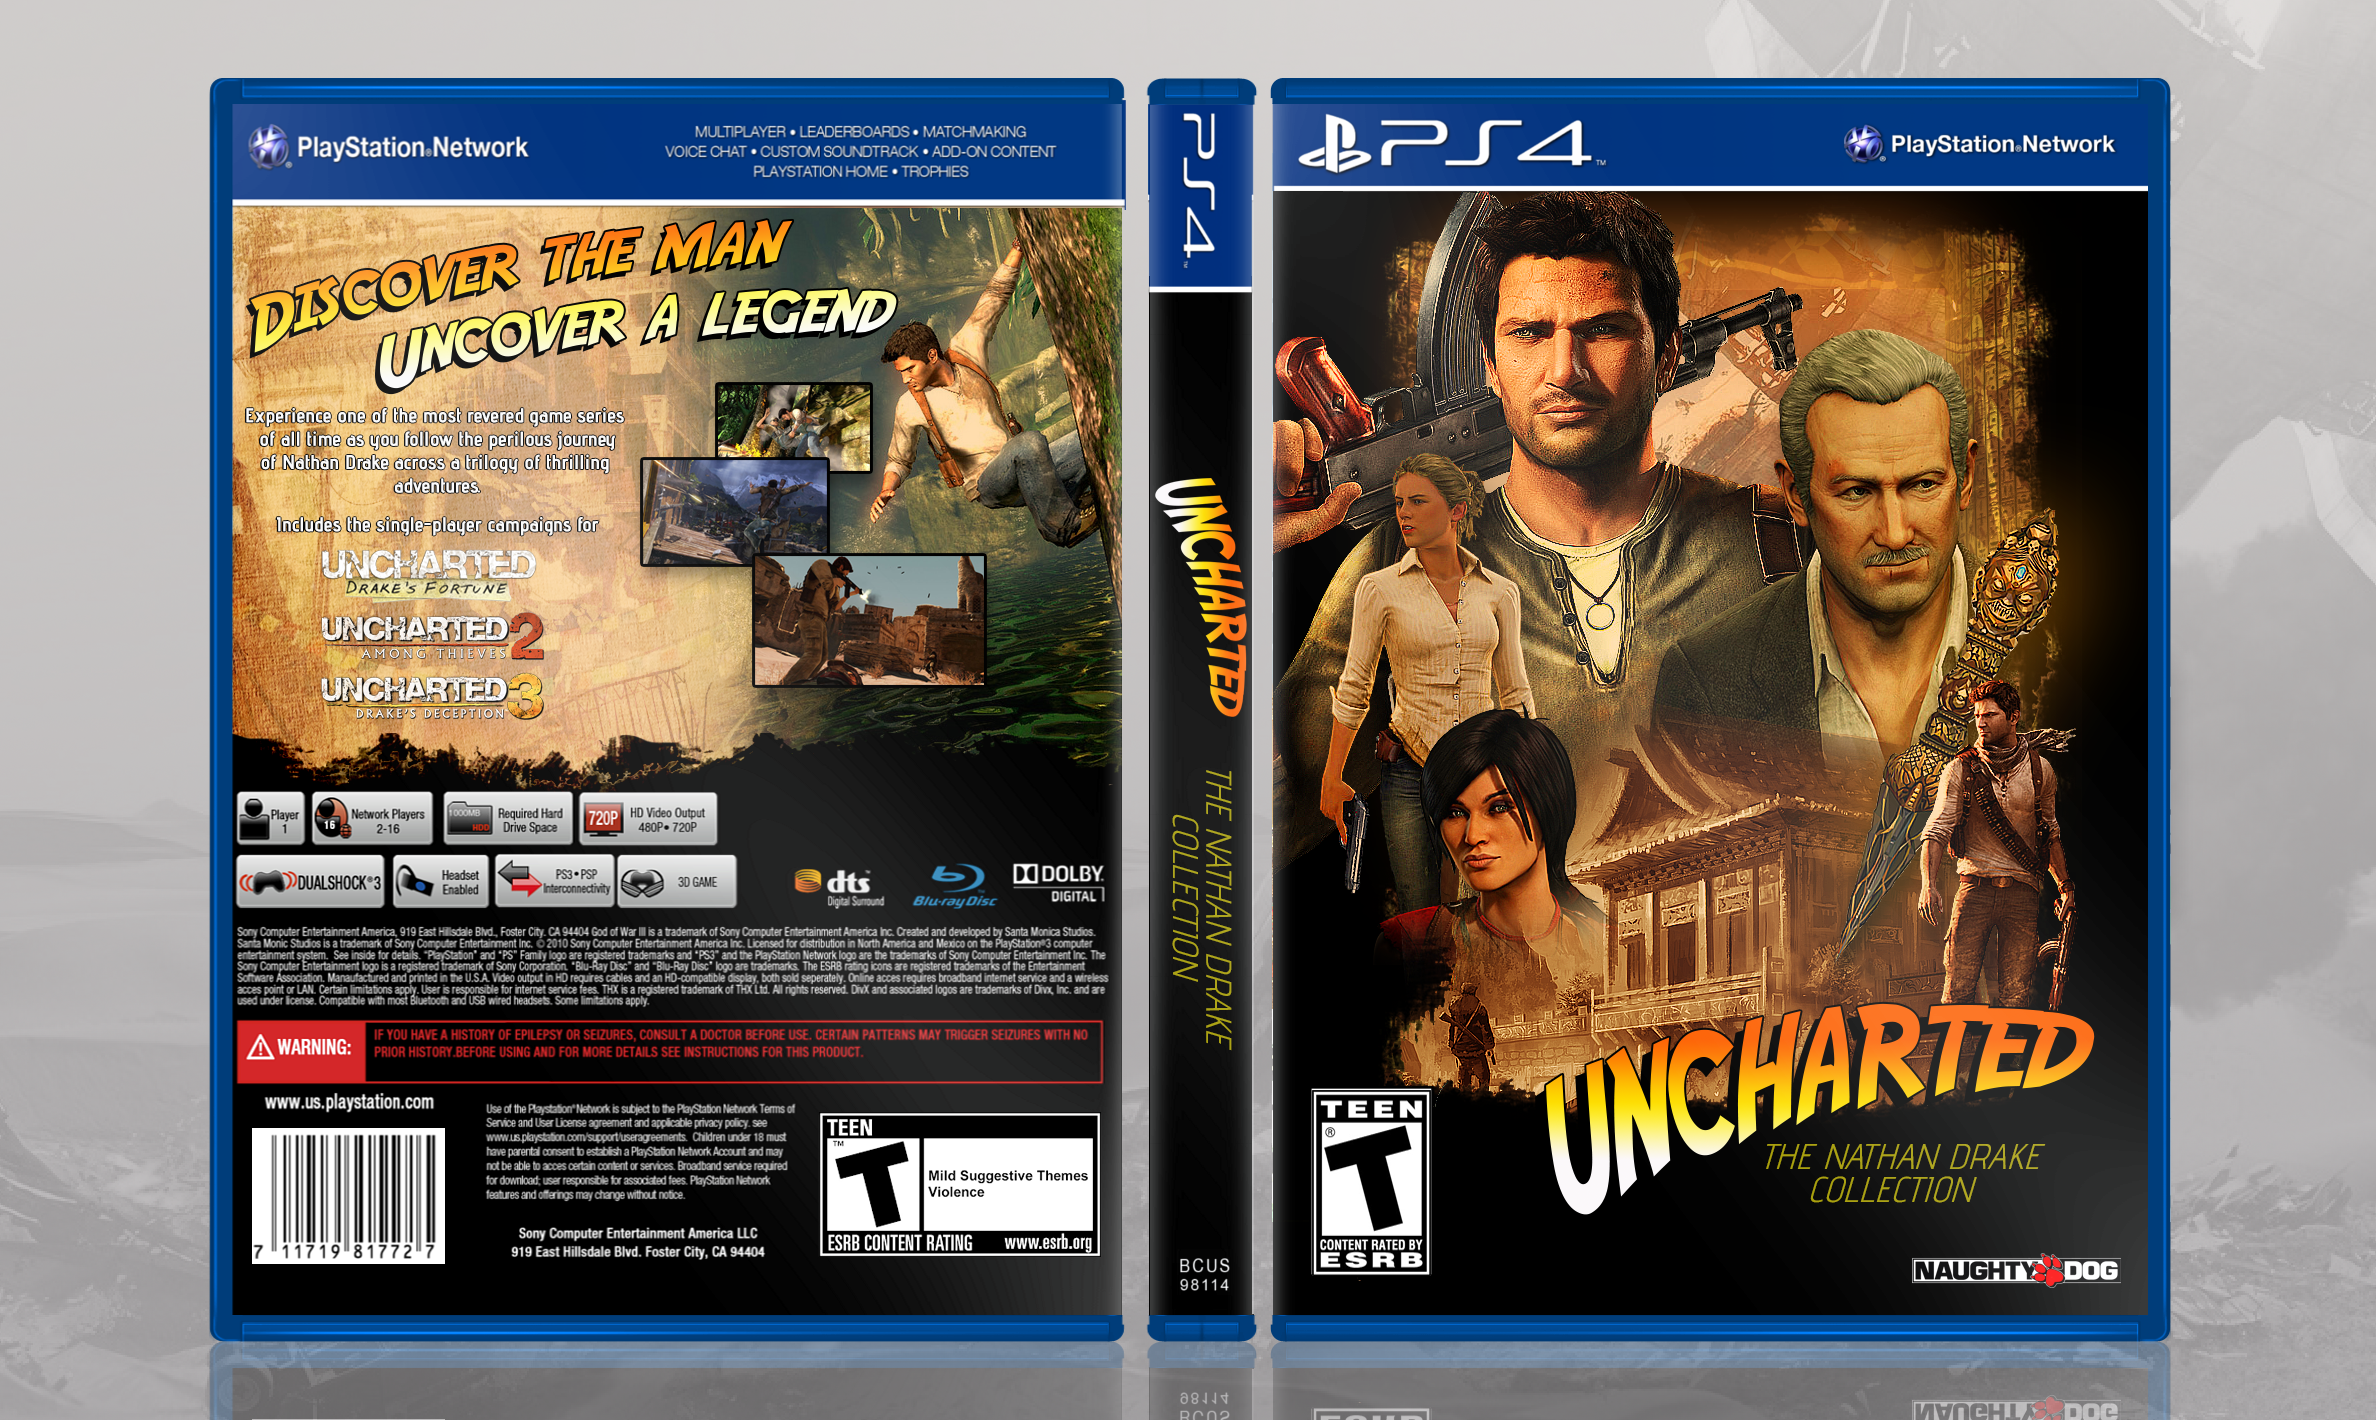 UNCHARTED: The Nathan Drake Collection - PlayStation 4